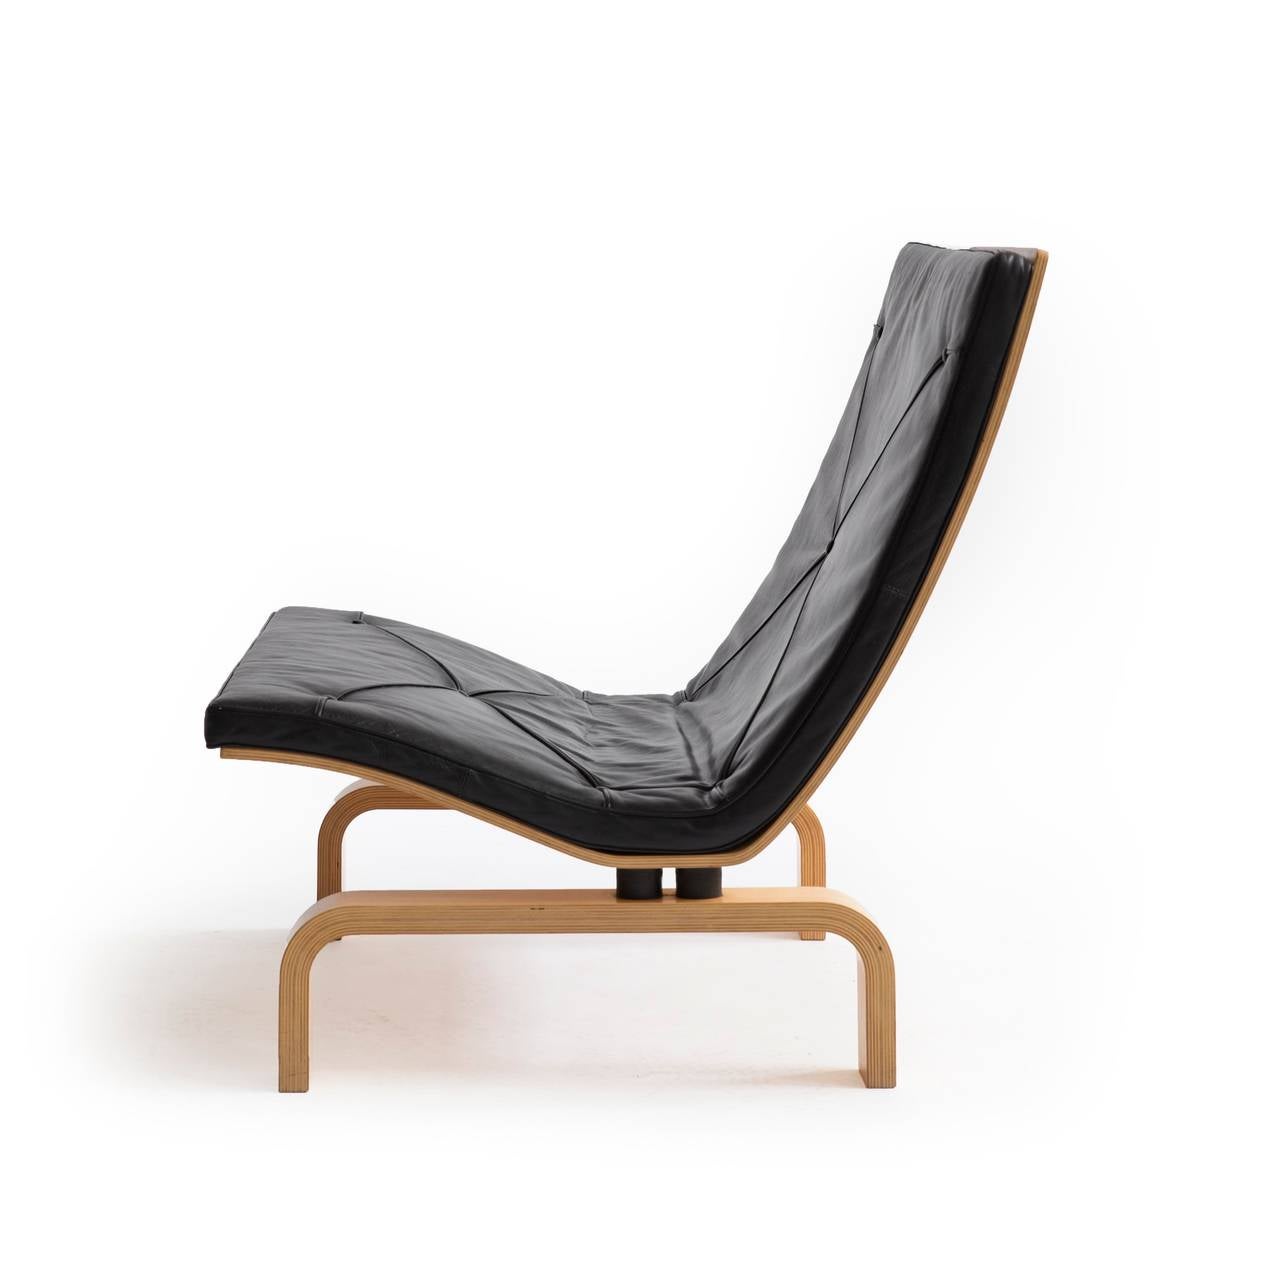 Poul Kjærholm PK-27 easy chair. 

Moulded laminated maple frame and original loose cushion in black leather, fitted with buttons. 

Designed by Kjaerholm 1971 and manufactured by E. Kold Christensen.